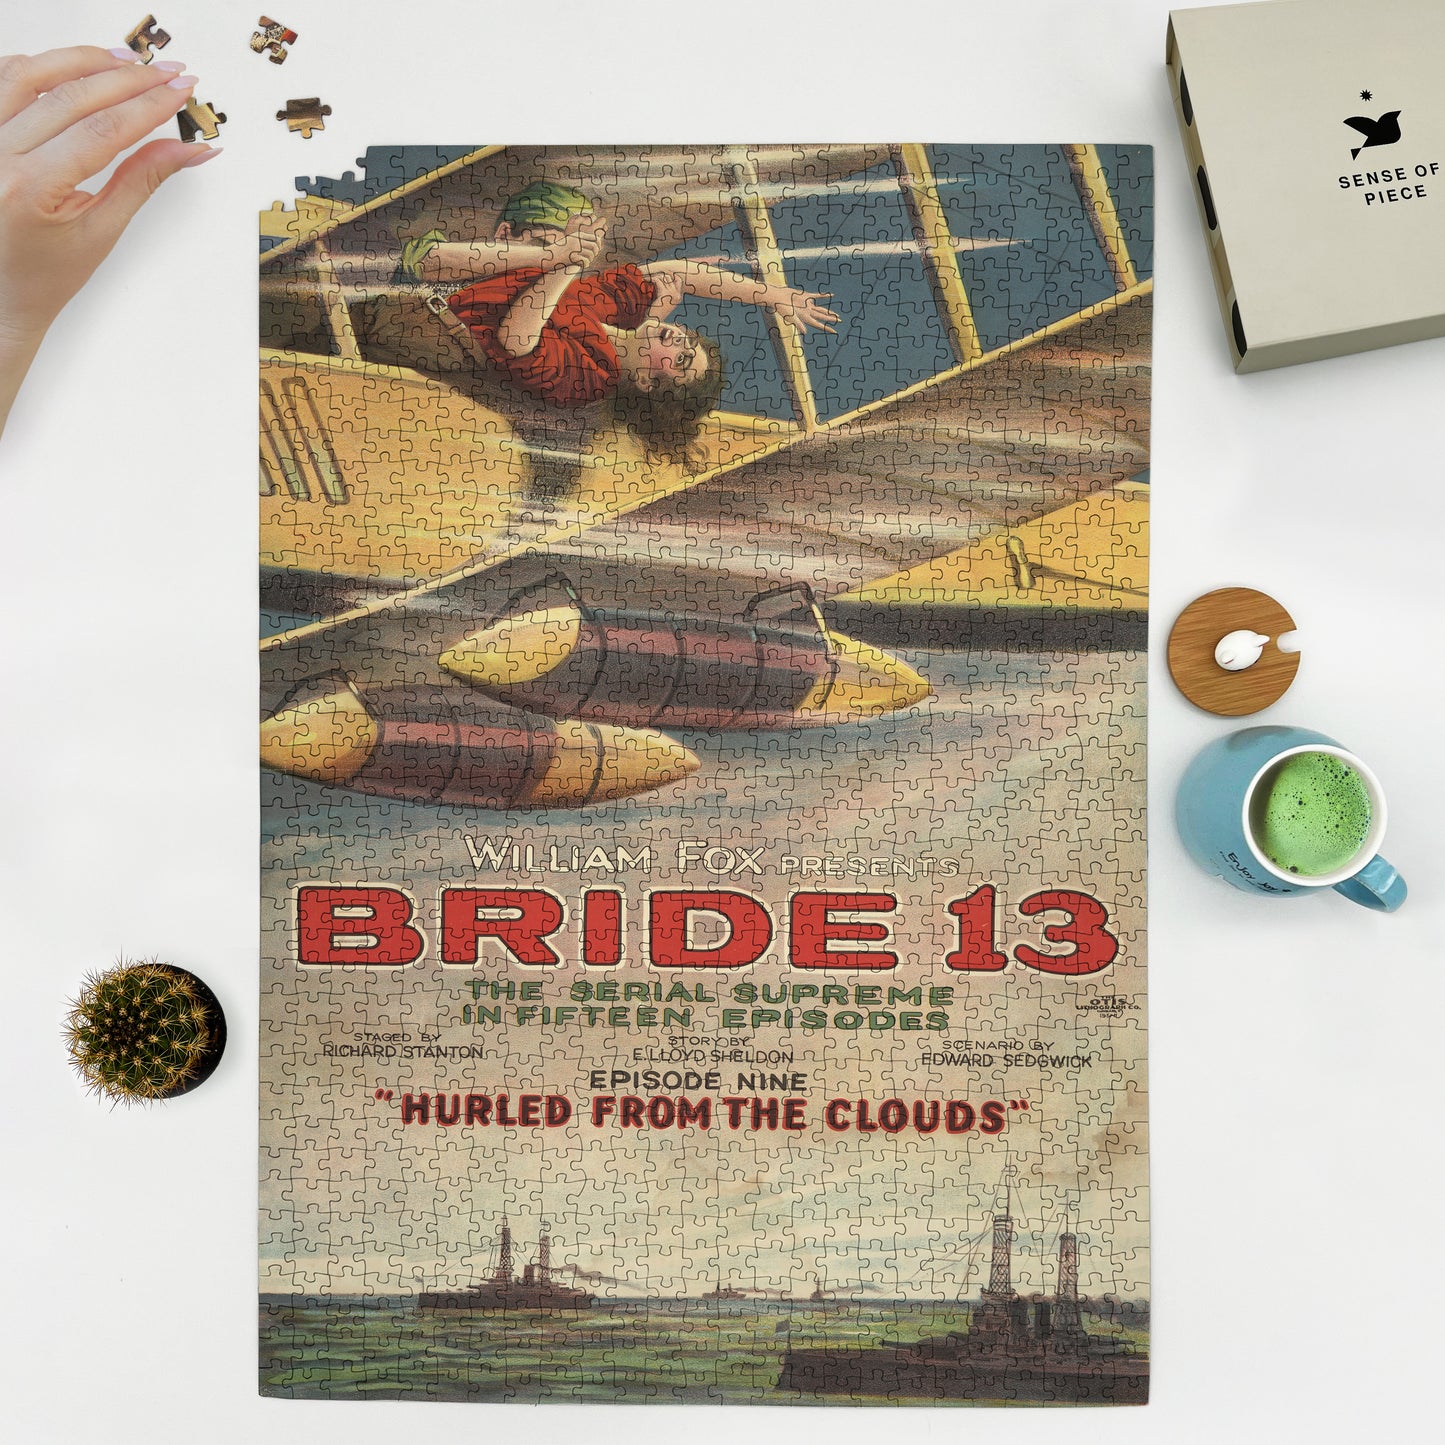 1000 piece puzzle 1920 William Fox presents bride 13 The serial supreme in fifteen episodes  Episode nine ‘hurled from the clouds’ Otis Litho  Co 